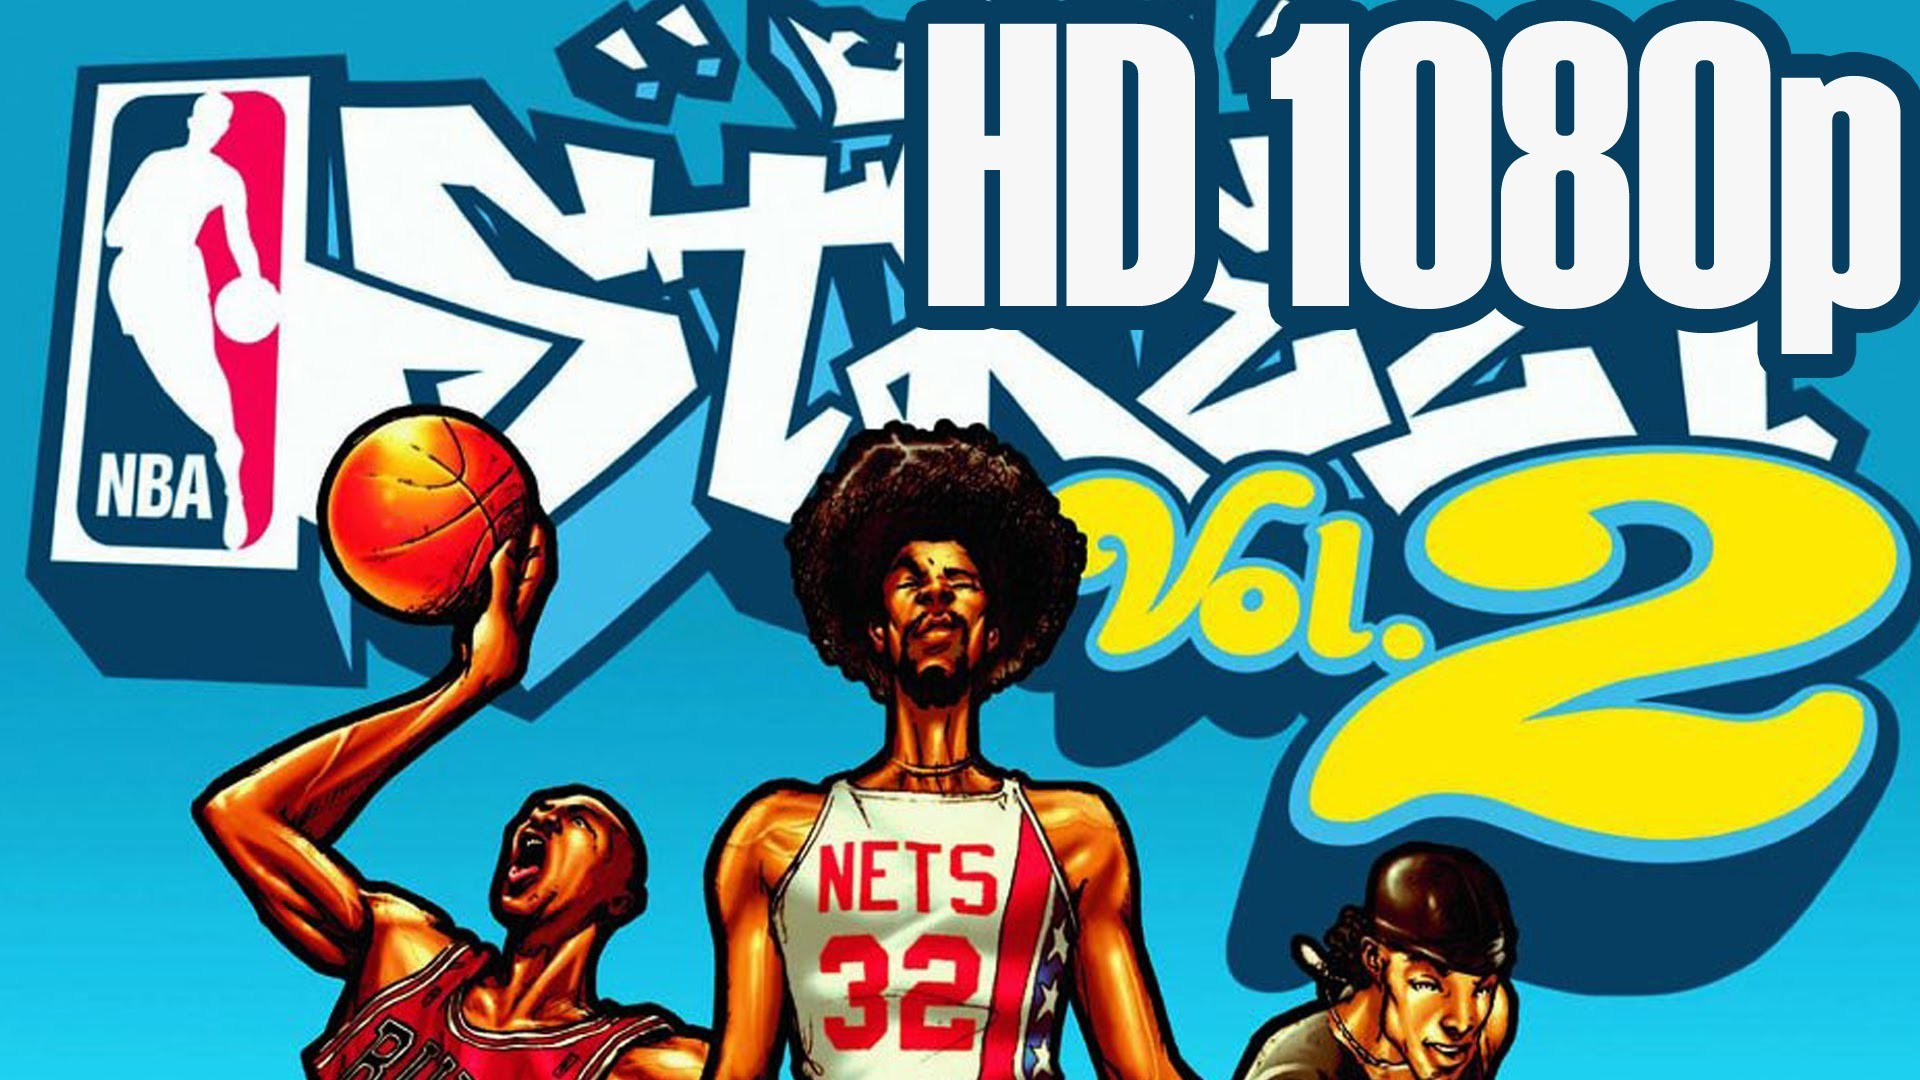 nba-street-vol-2-in-hd-commentary-1080p-youtube